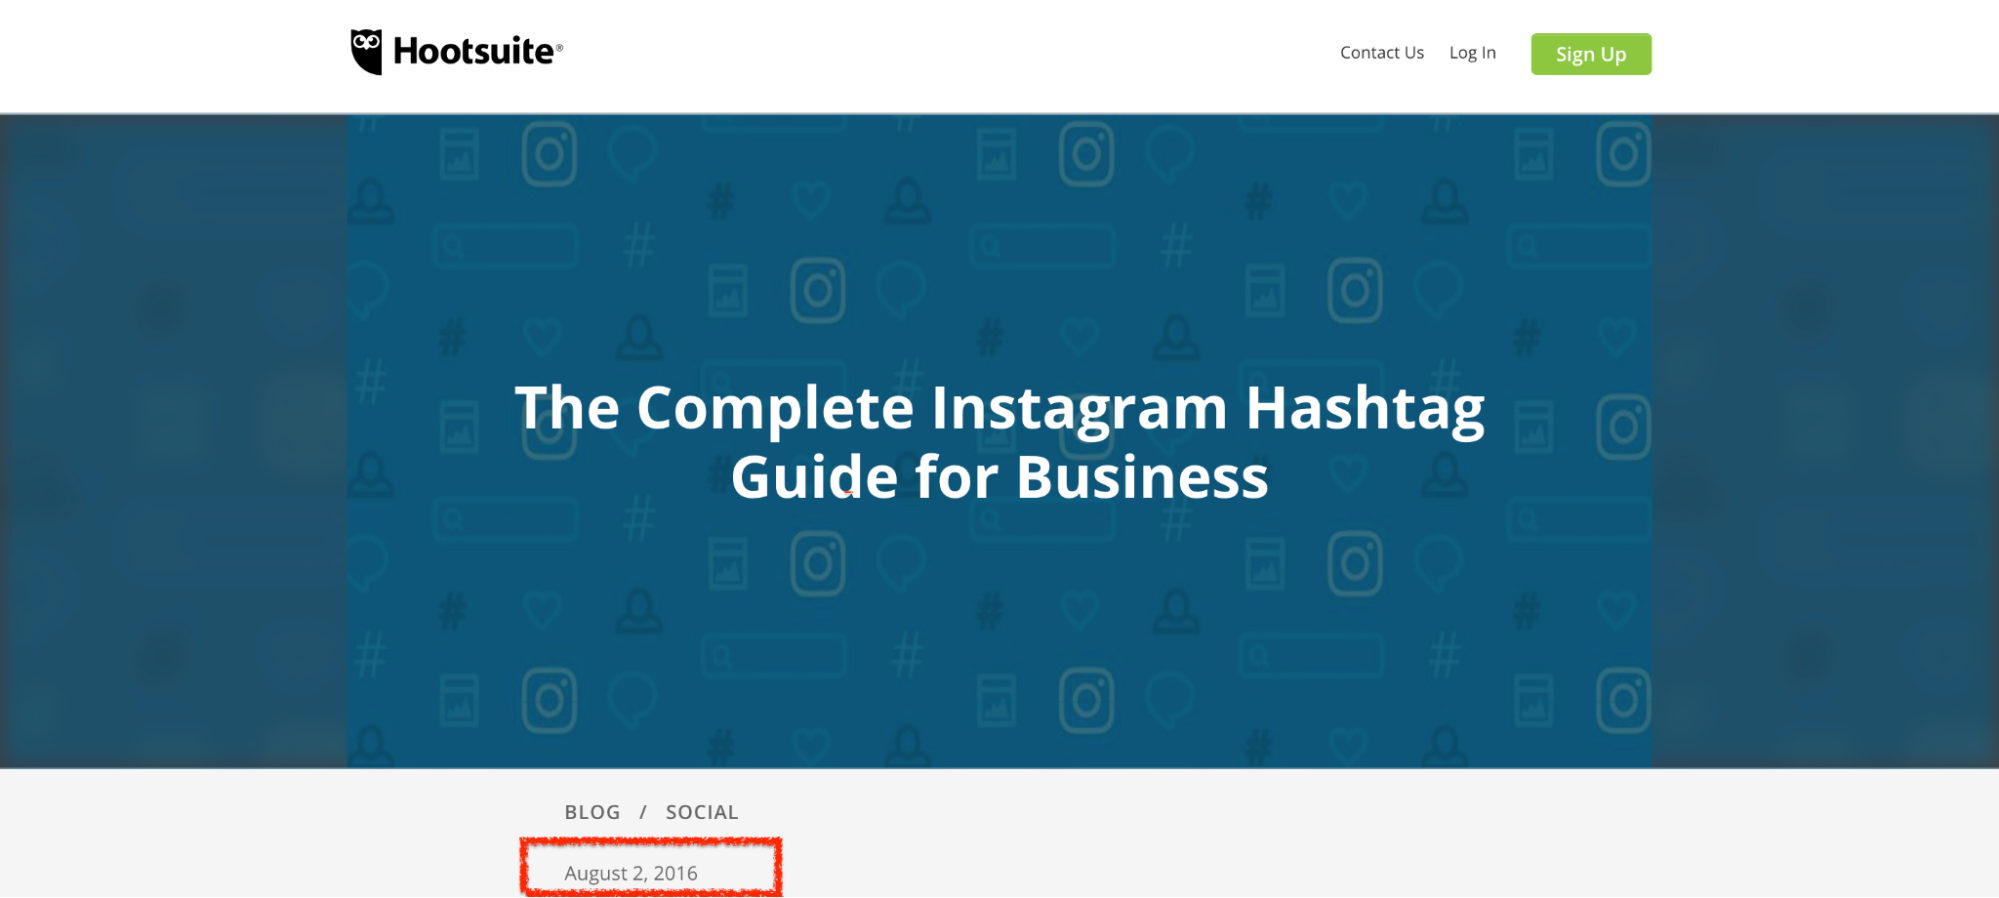 Blog post for 'The Complete Instagram Hashtag Guide for Business'